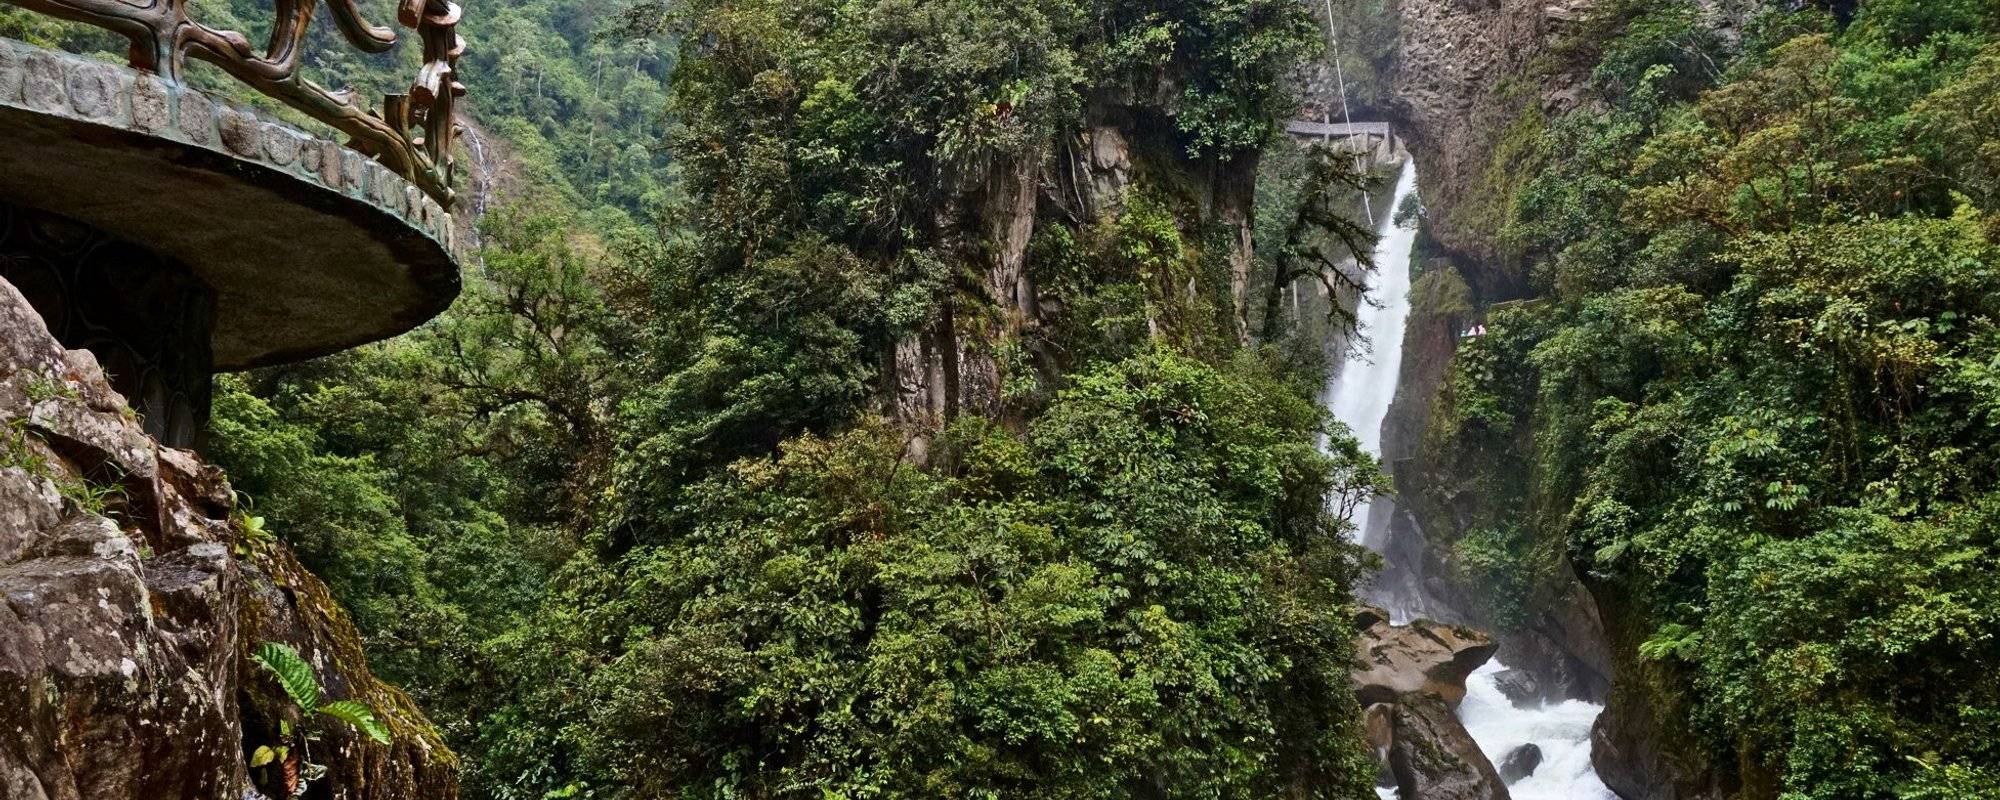 Tall Mountains, Deep Gorges and Spectacular Waterfalls of Tungurahua (Baños)